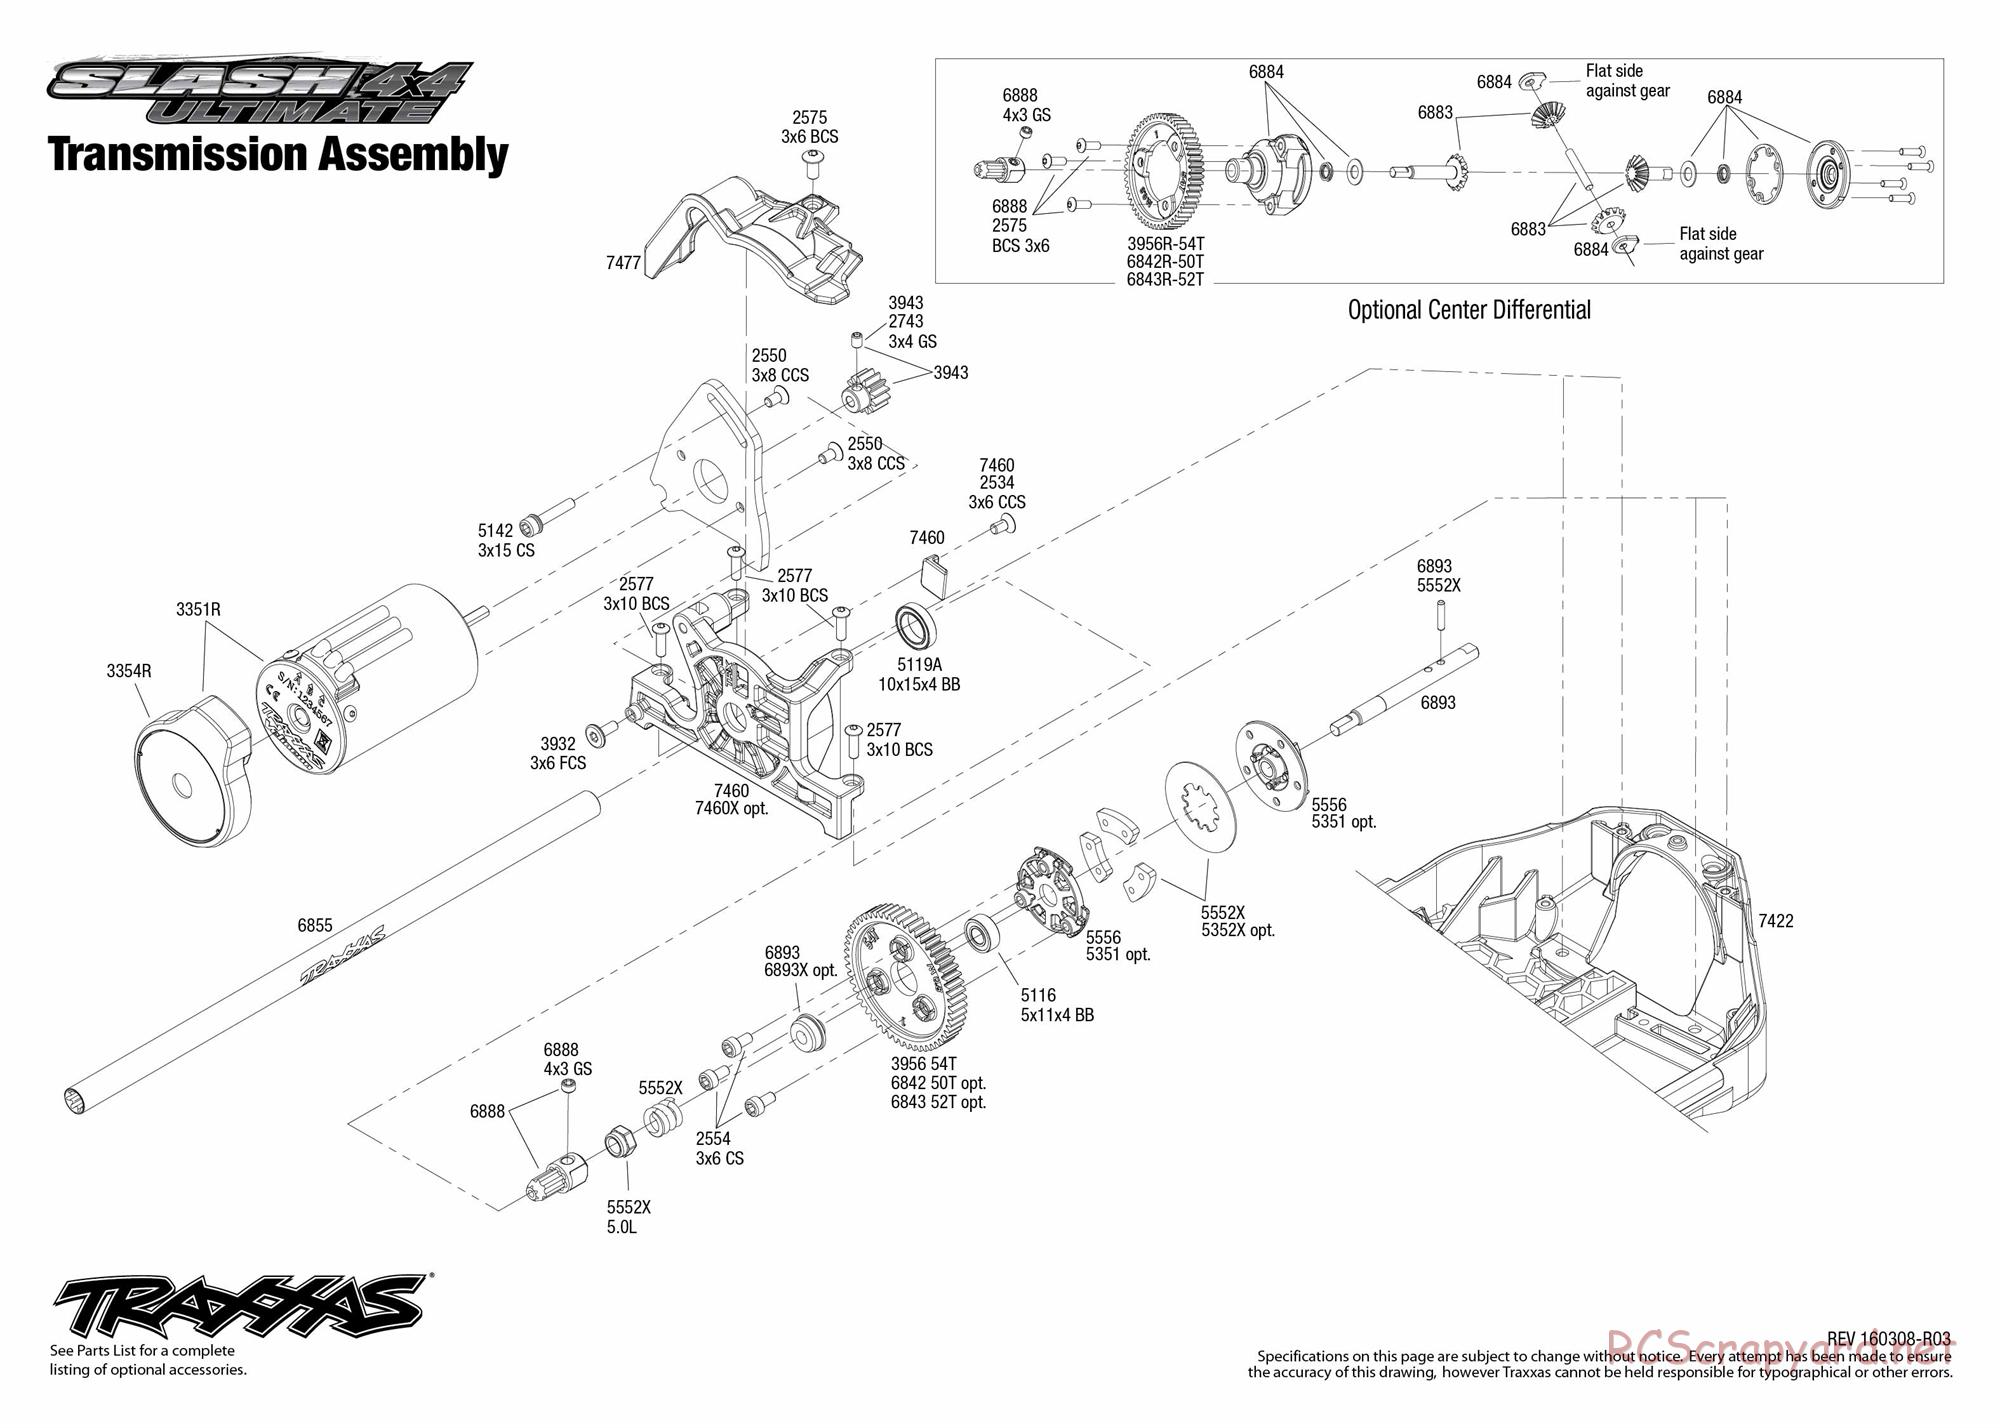 Traxxas - Slash 4x4 Ultimate (2015) - Exploded Views - Page 5